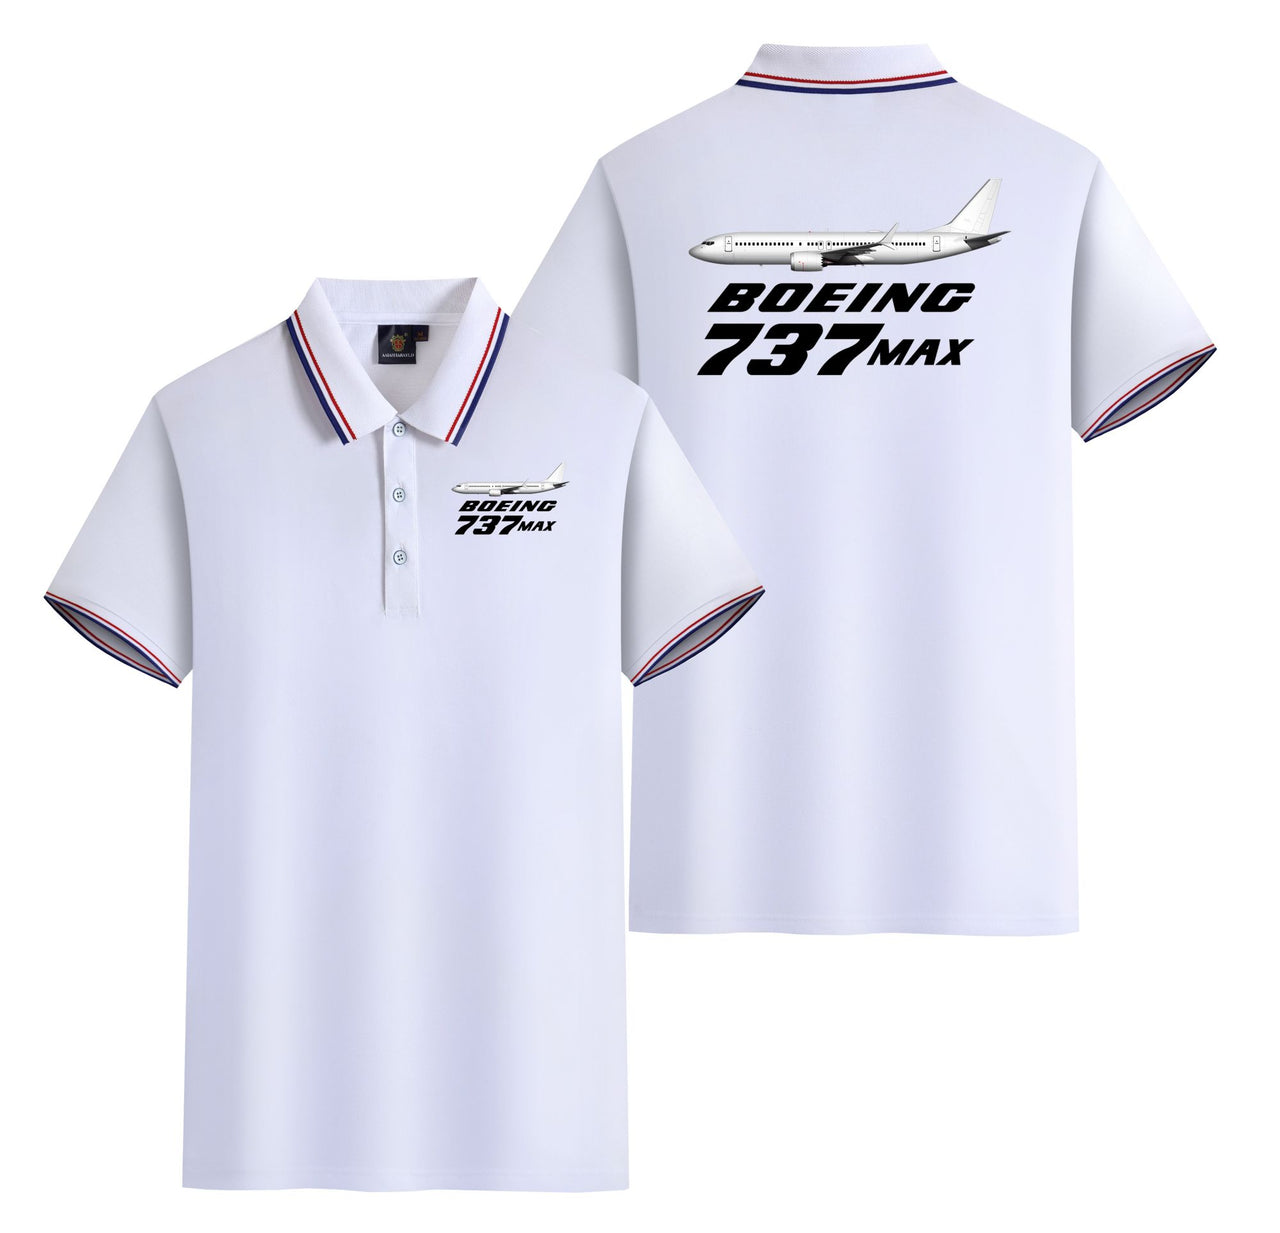 The Boeing 737Max Designed Stylish Polo T-Shirts (Double-Side)